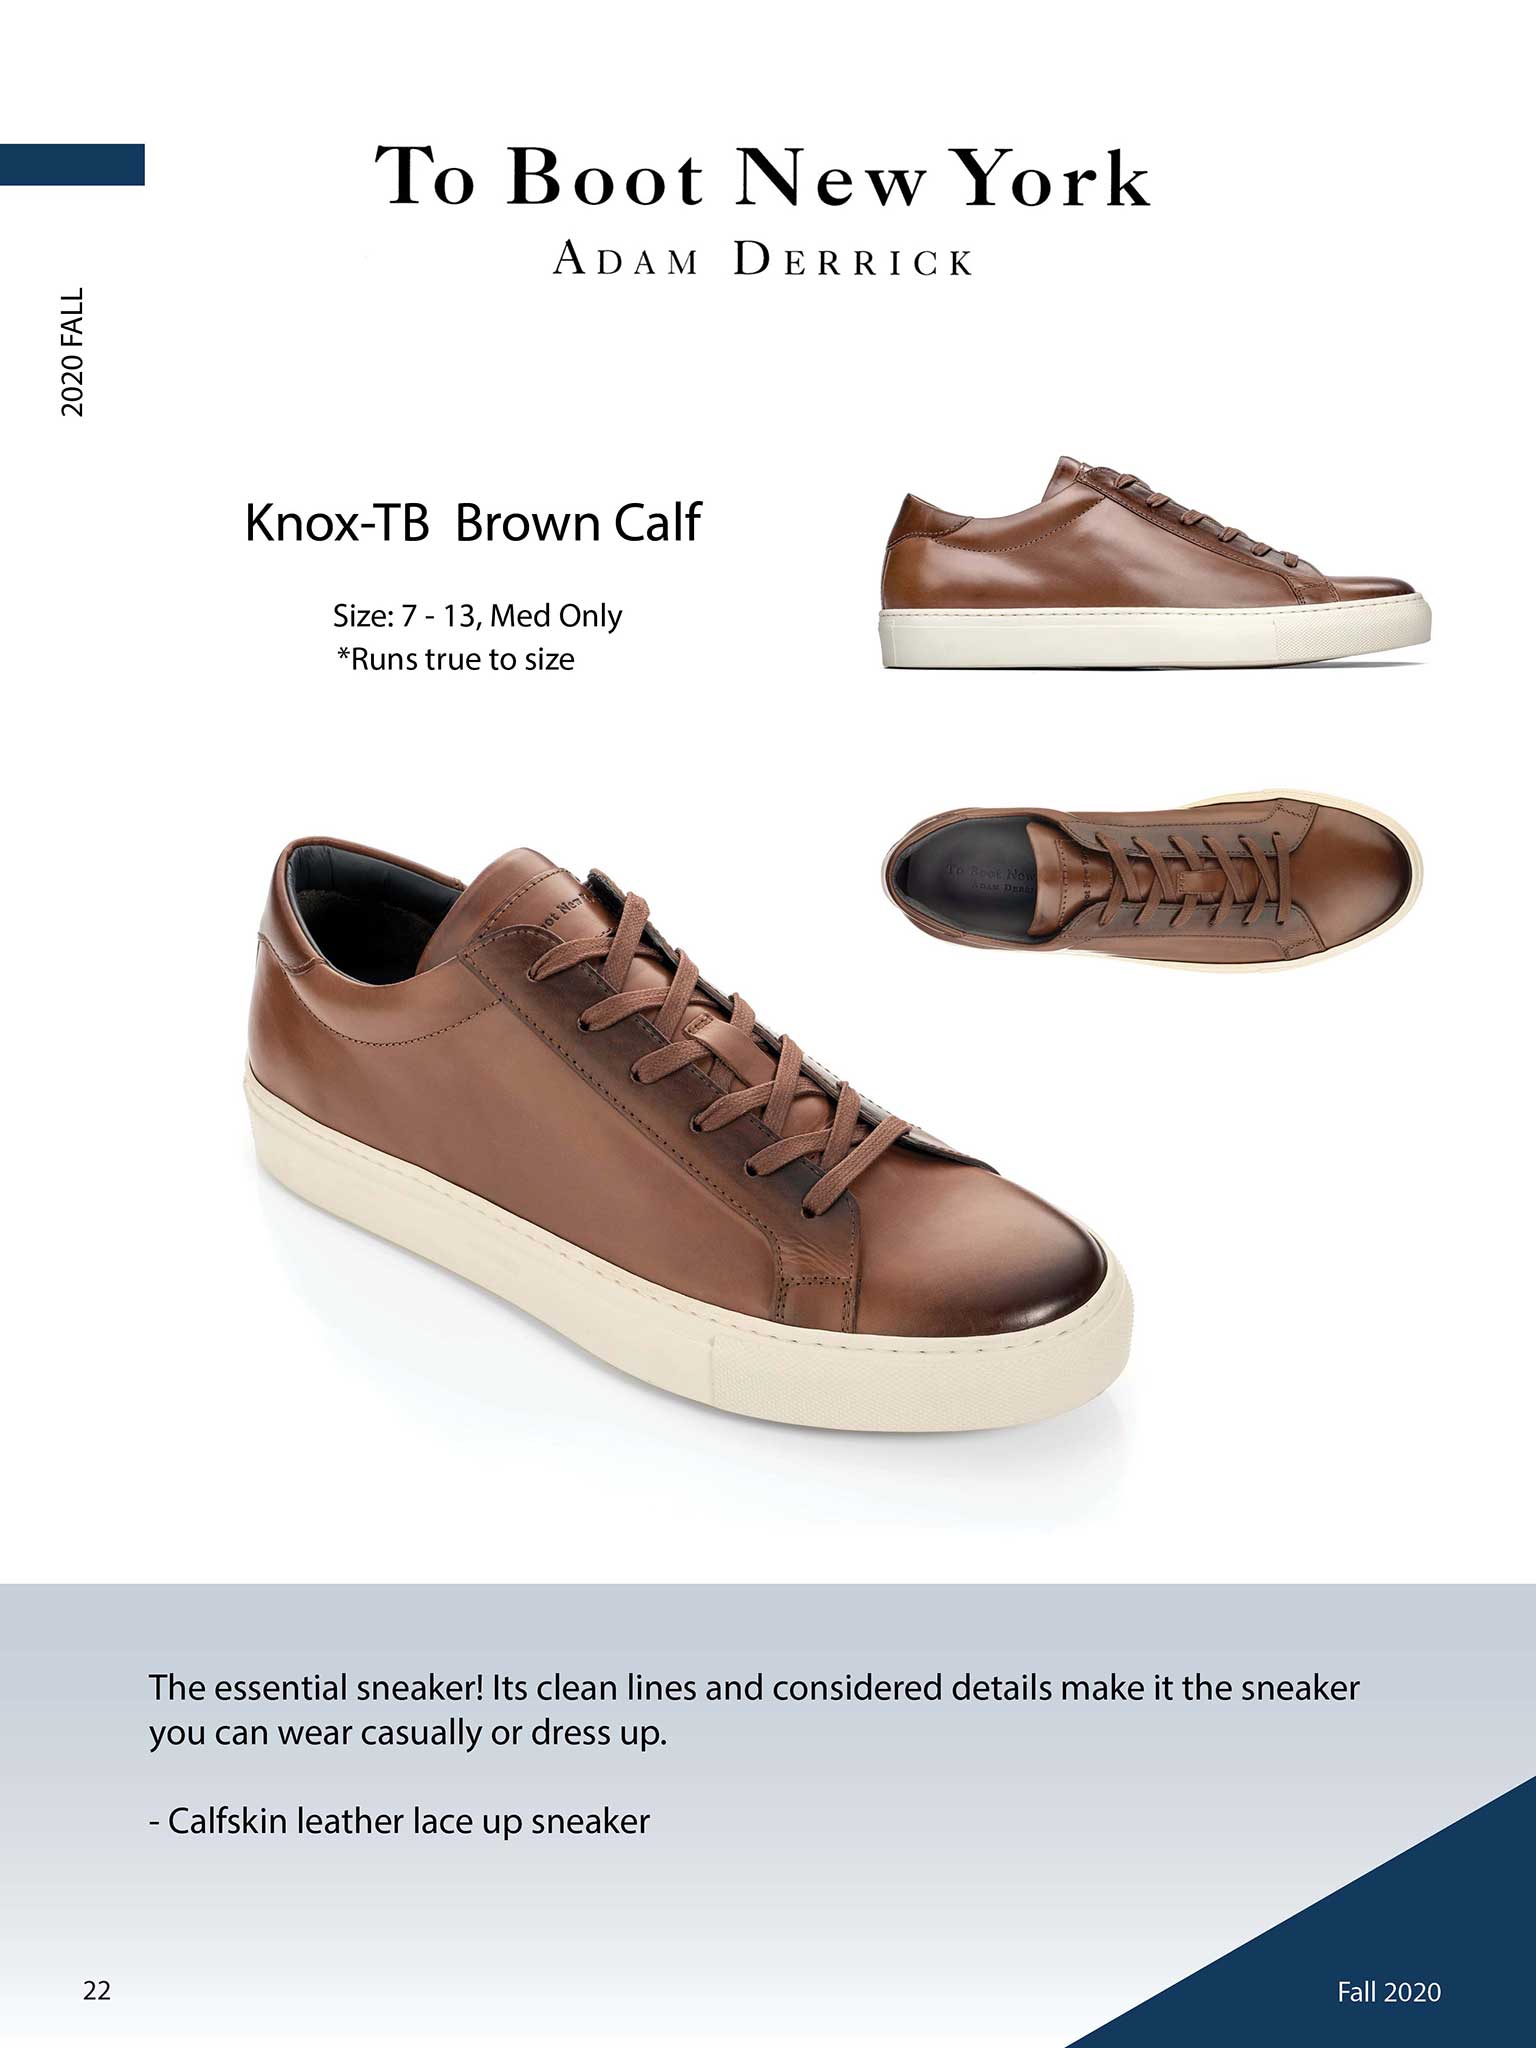 To Boot New York                                                                                                                                                                                                                                          , Knox in Brown Calf by To Boot New York